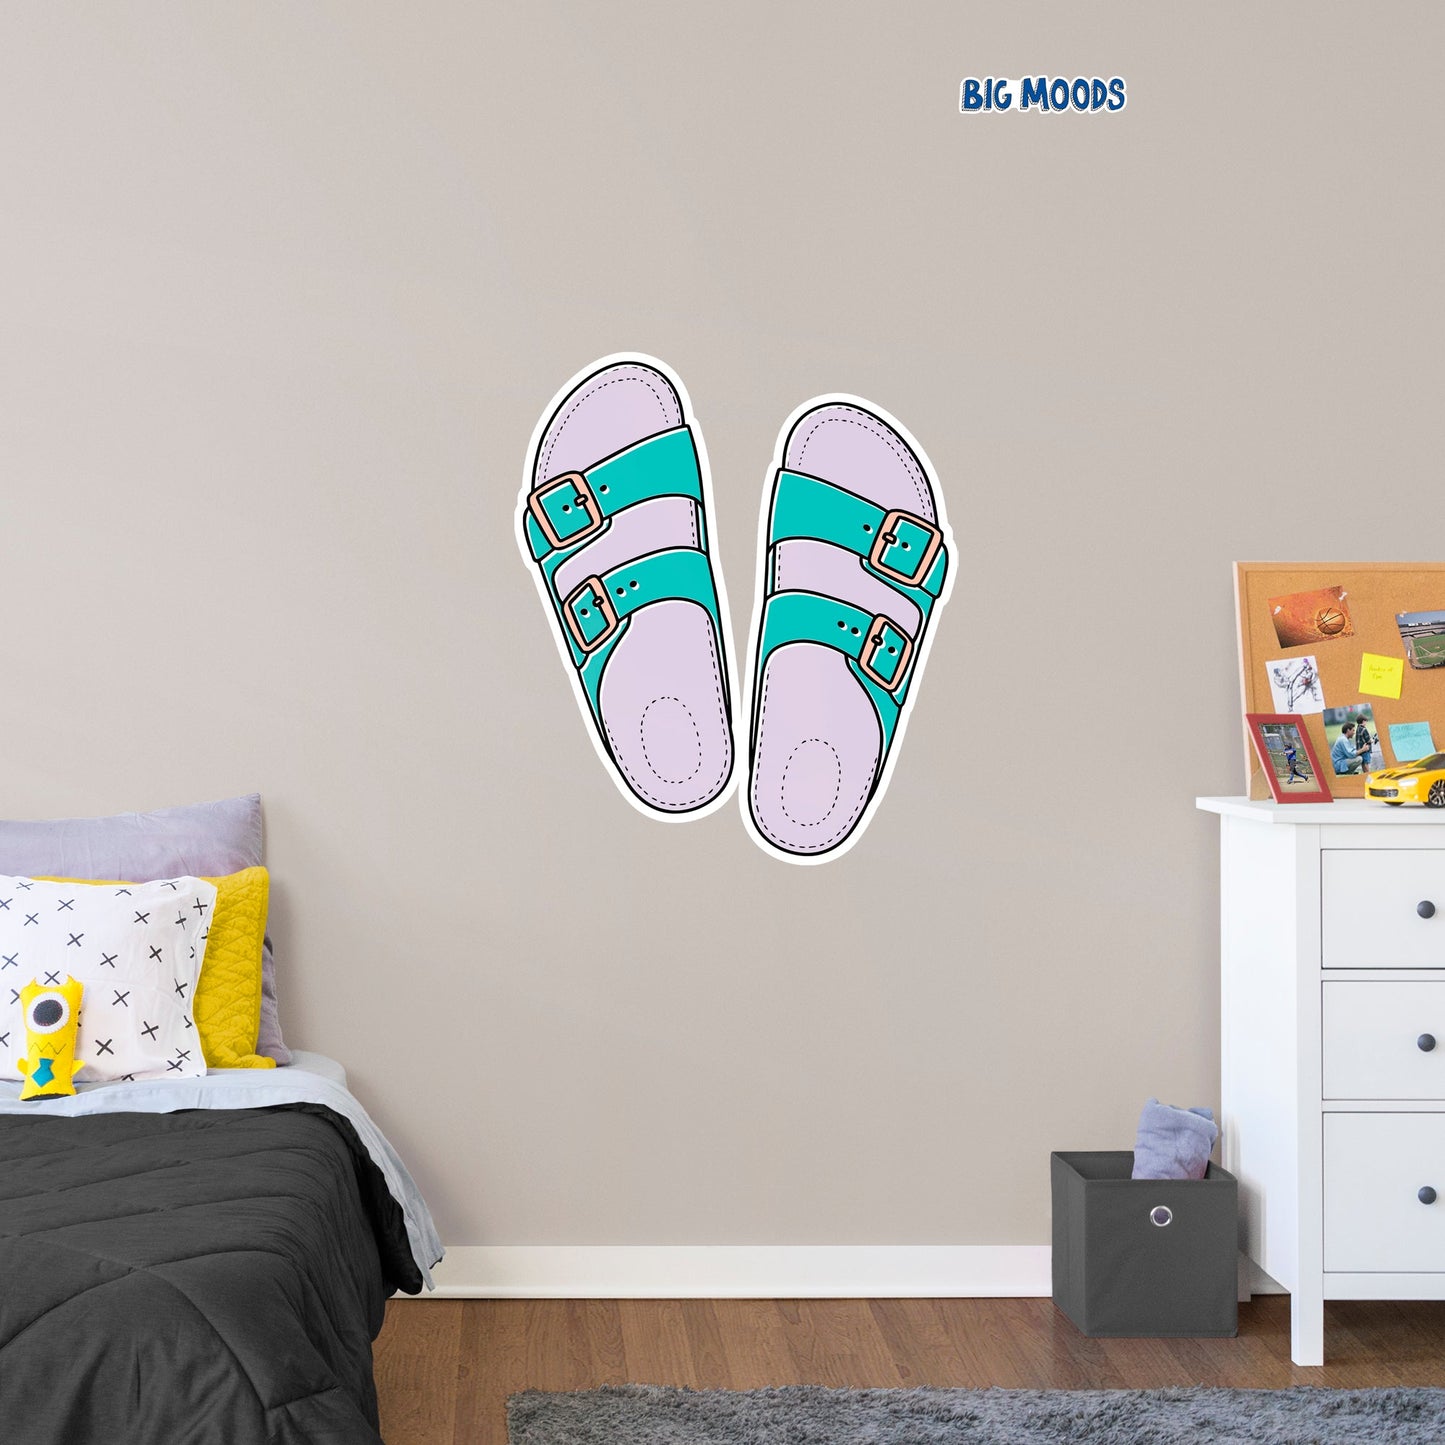 Sandals (Multi-Color)        - Officially Licensed Big Moods Removable     Adhesive Decal